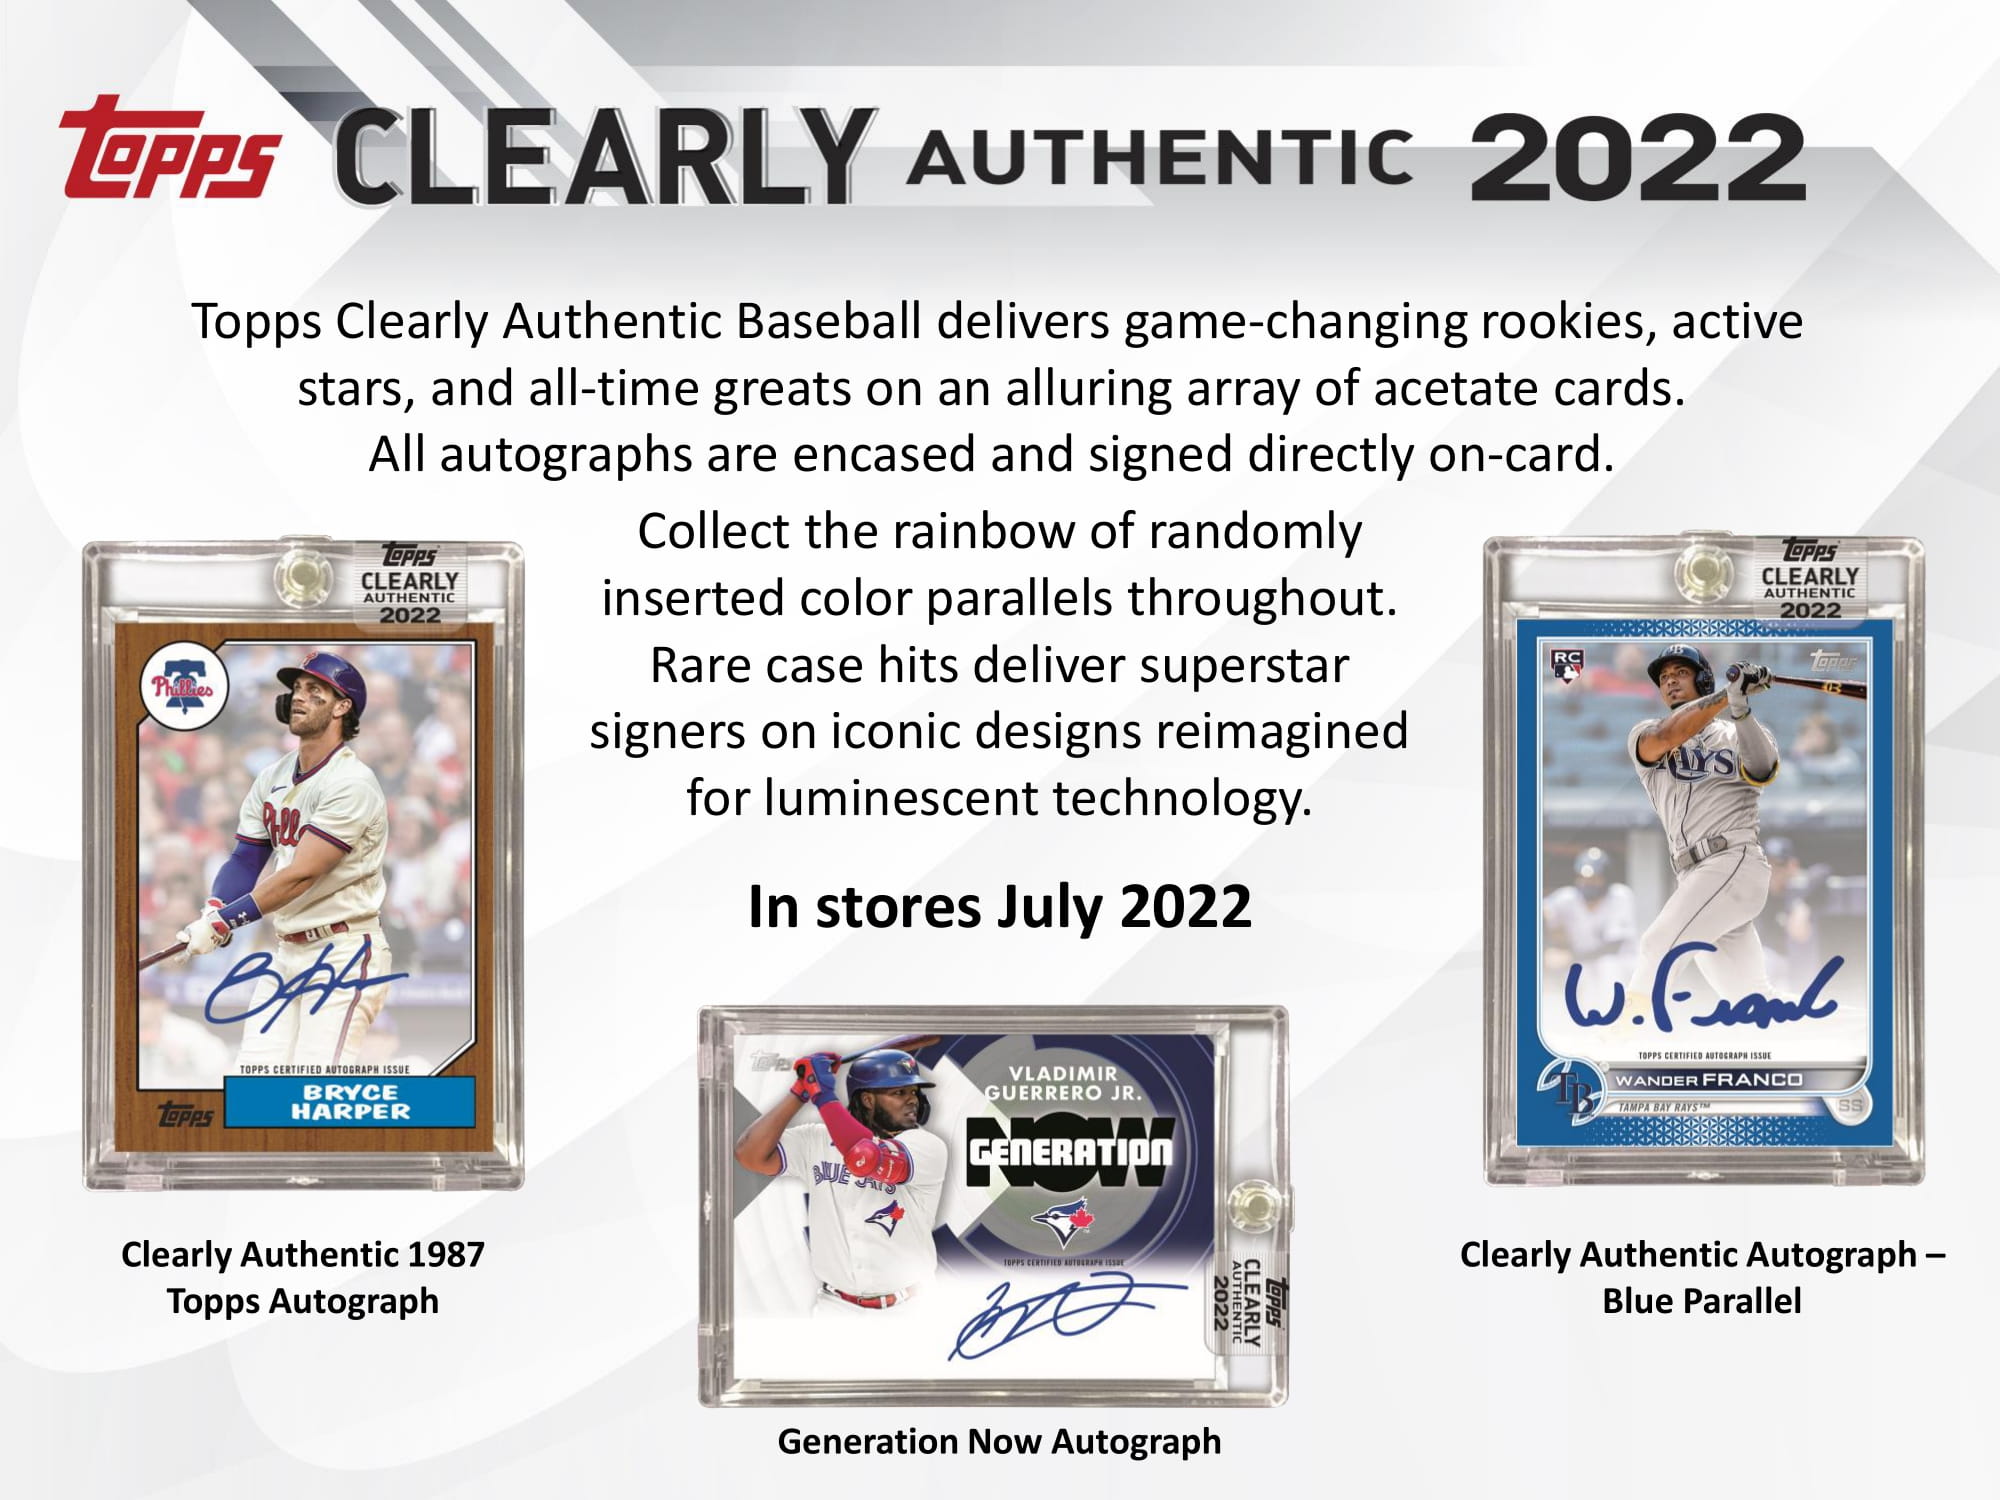 MLB 2022 TOPPS CLEARLY AUTHENTIC BASEBALL HOBBY